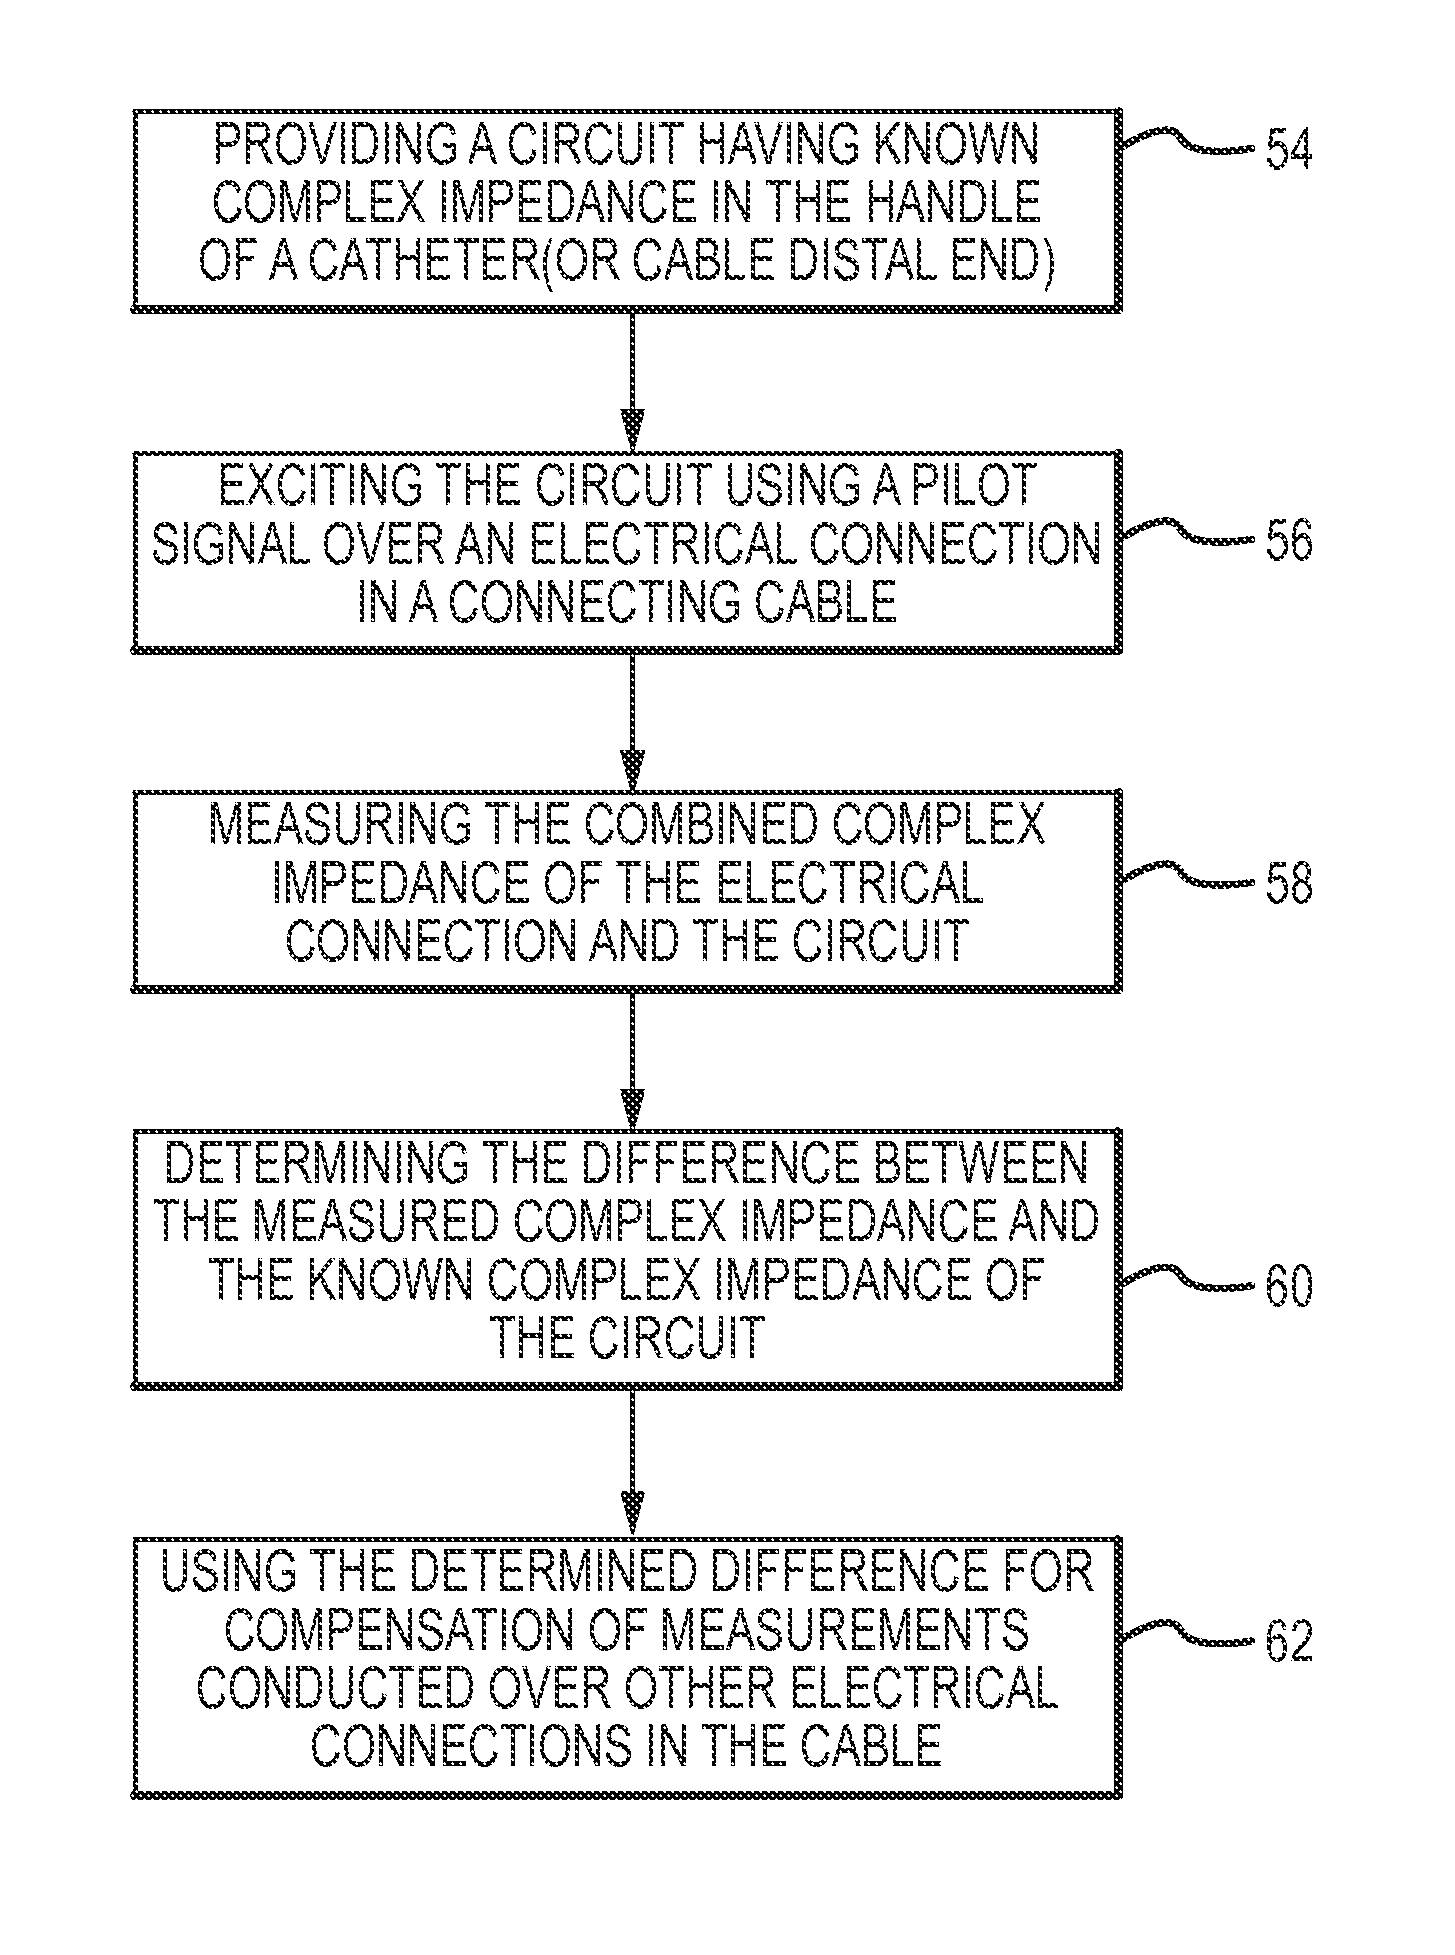 Method and apparatus for complex impedance compensation